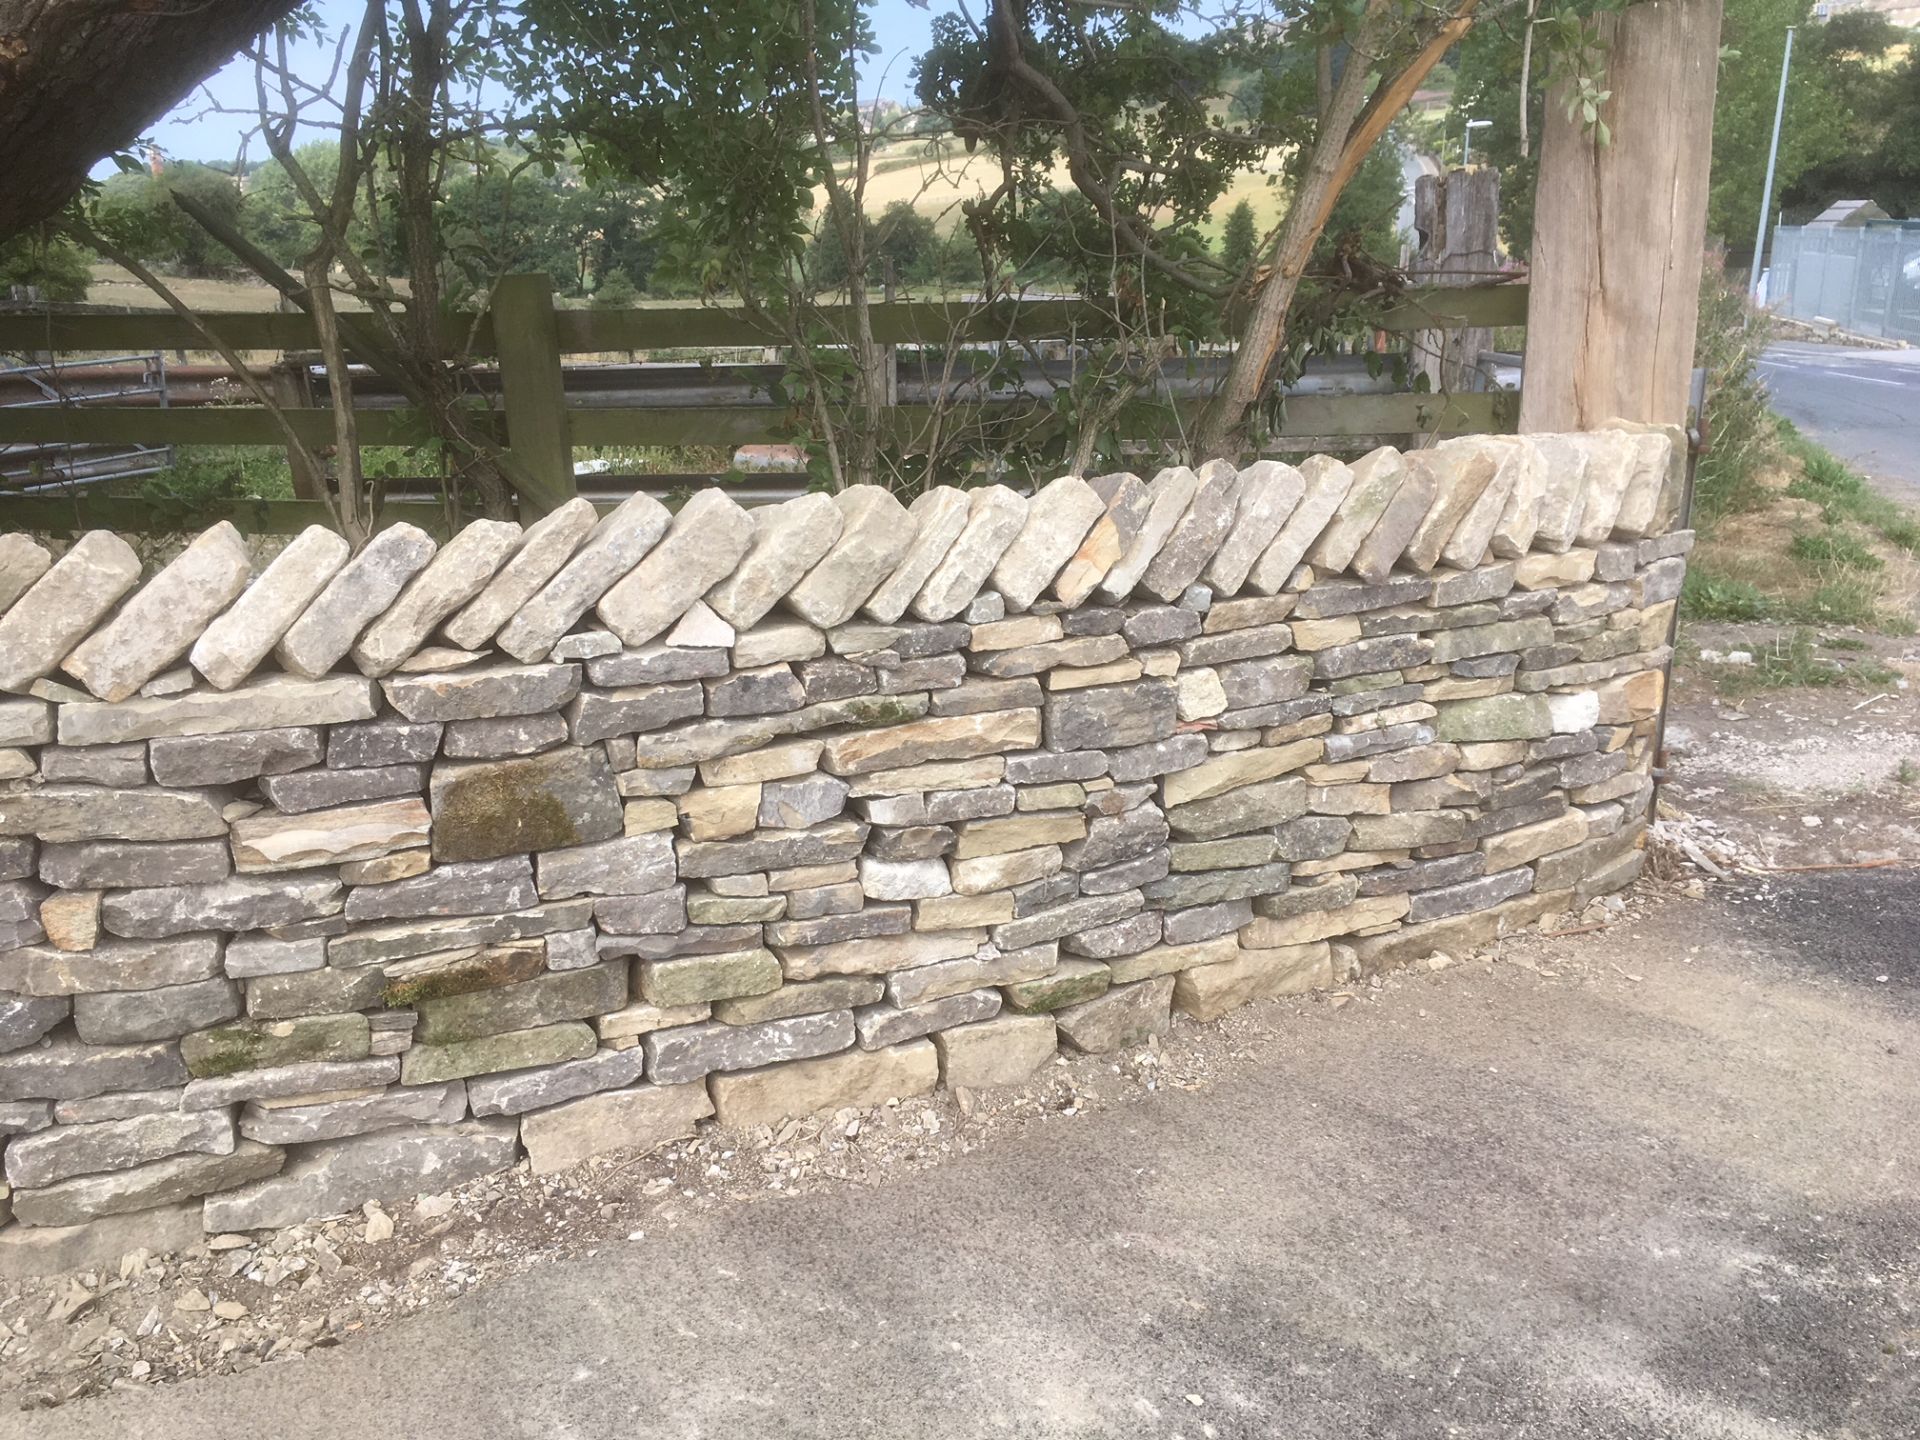 24 bulk bags Yorkshire Dry Stone Walling, each bag 1tonne, which approximately equates to 1m² of